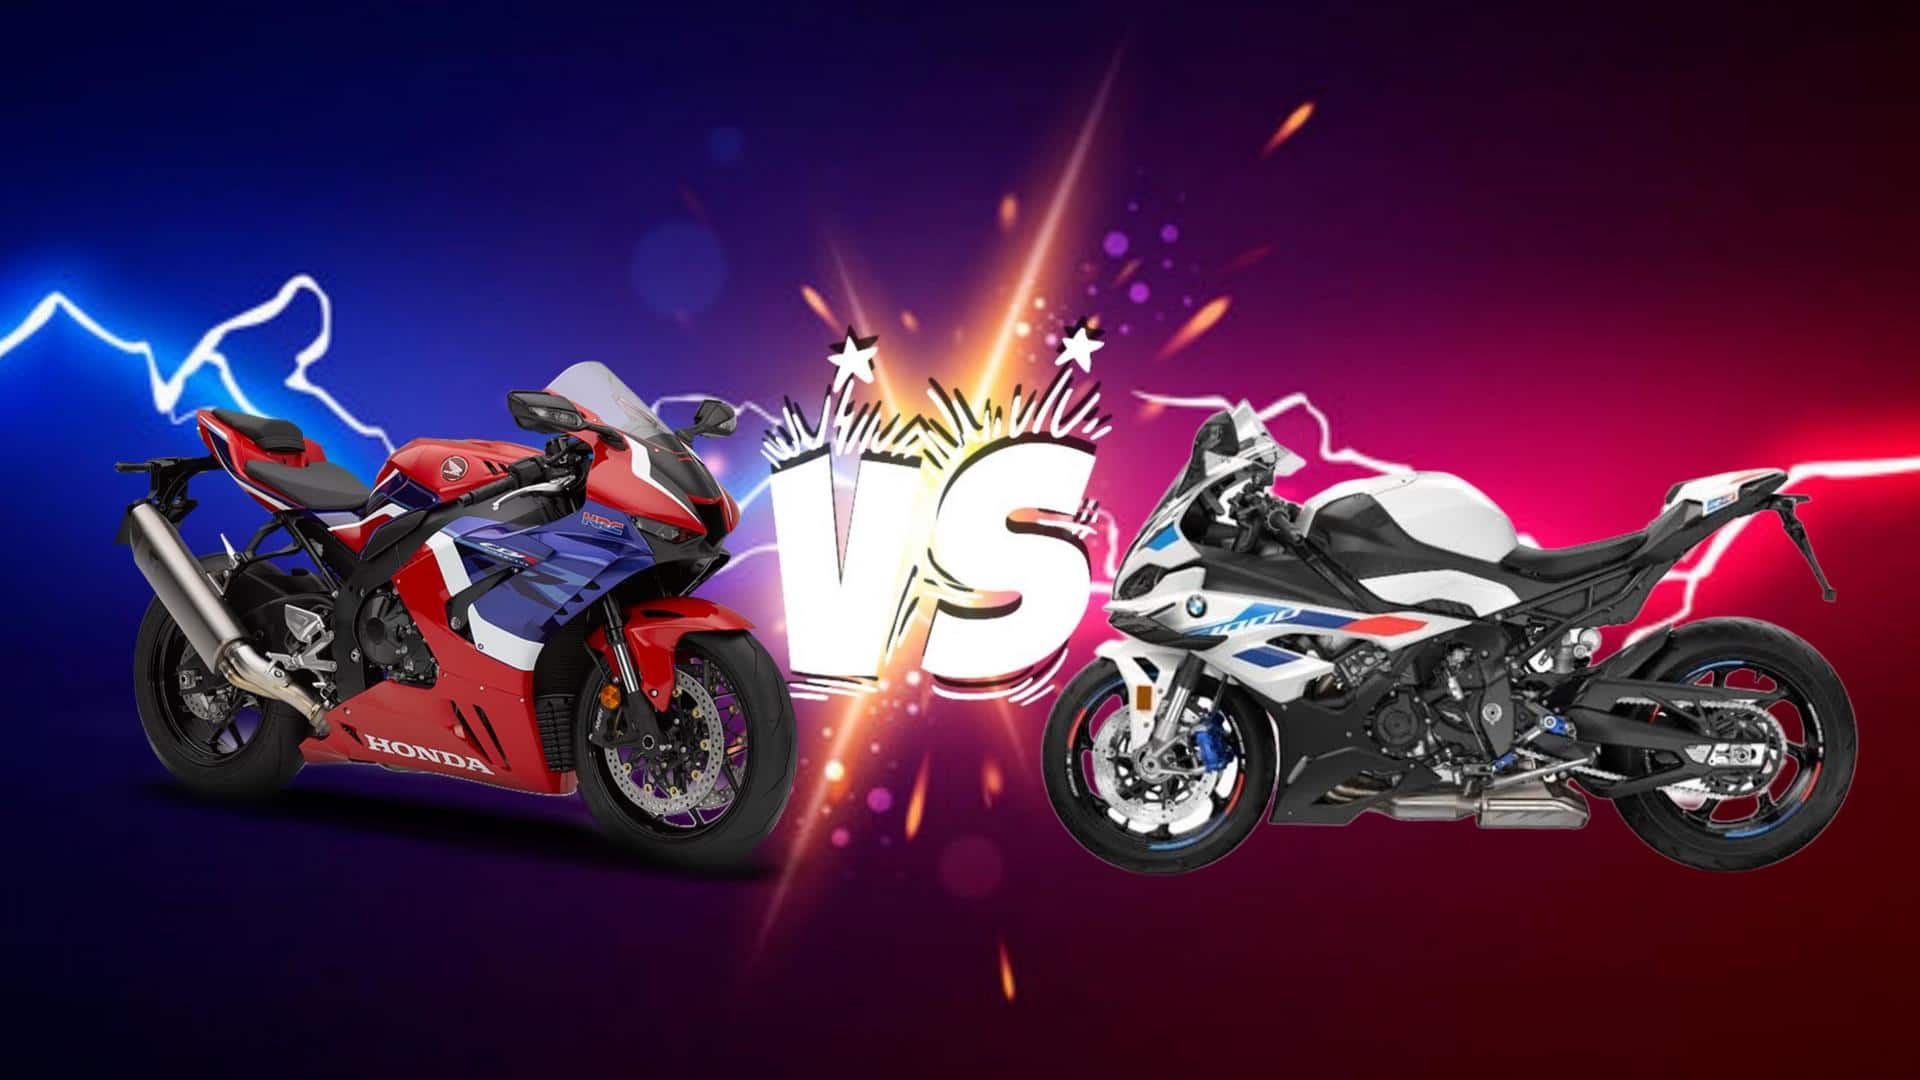 BMW S 1000 RR v/s Honda CBR1000RR-R: Which is better?